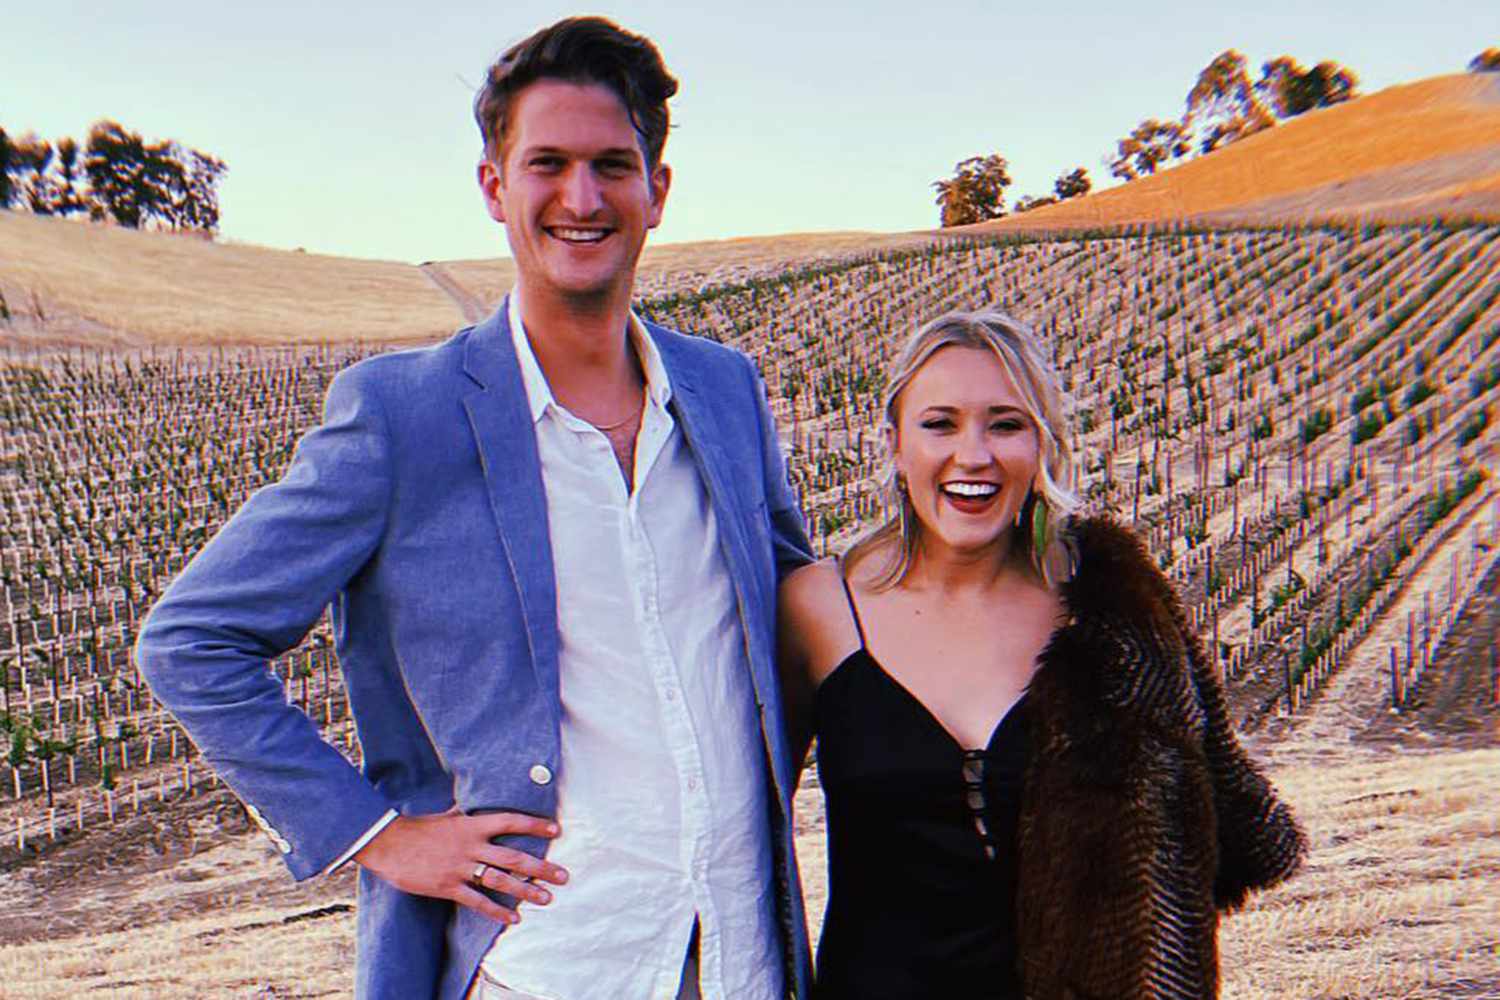 Emily Osment ‘Cannot Wait’ to Marry Fiancé Jack Anthony in the Fall: ‘It’s So Exciting’